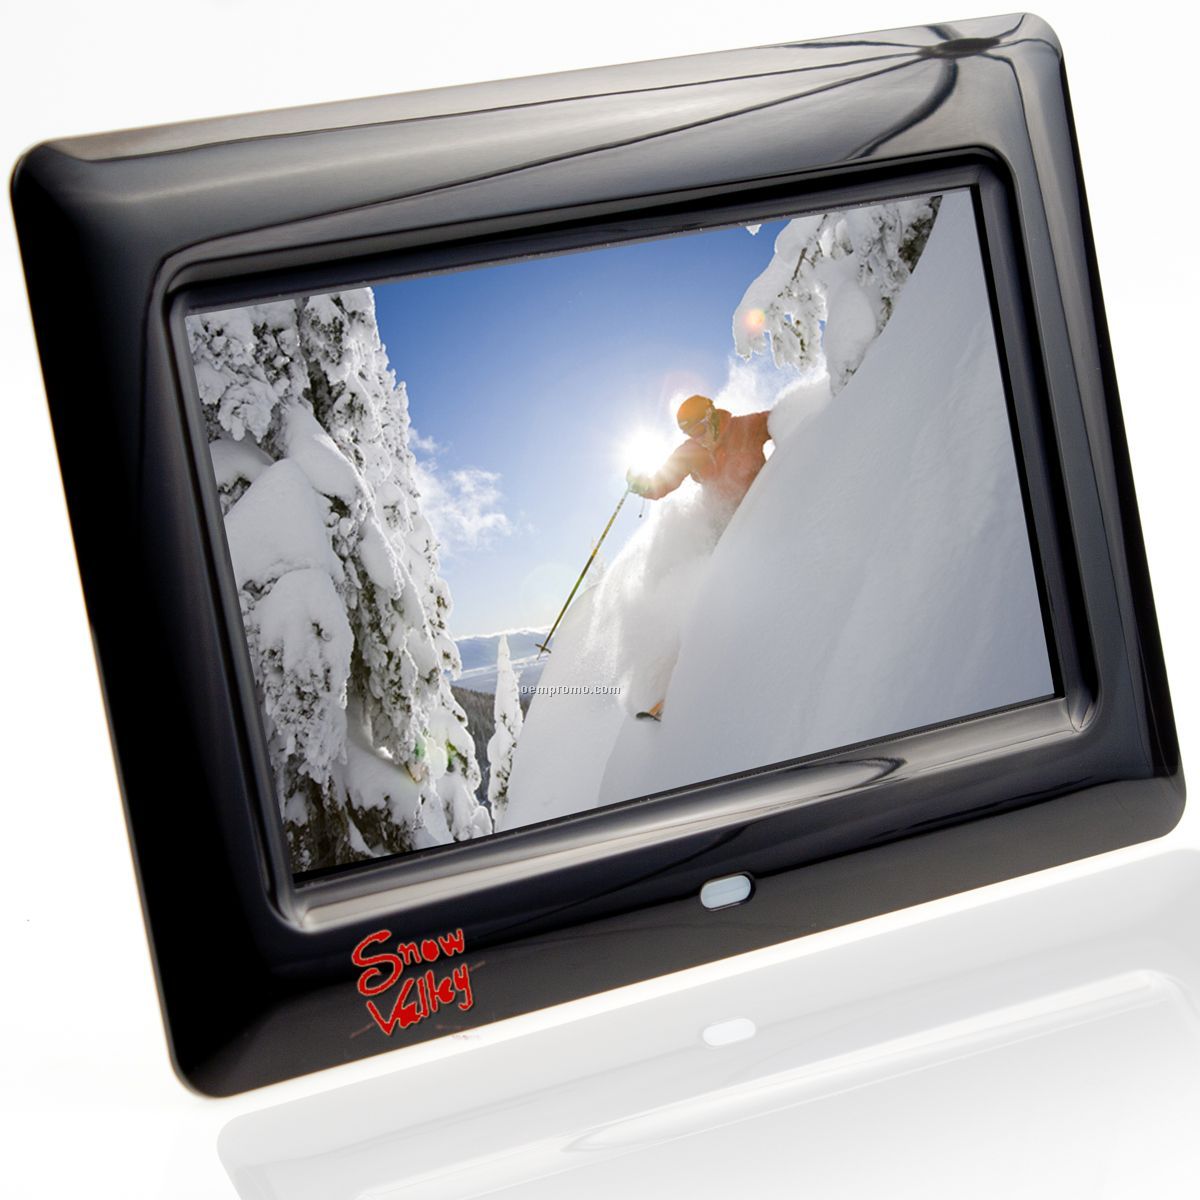 7" Digital Picture Frame - Single Function